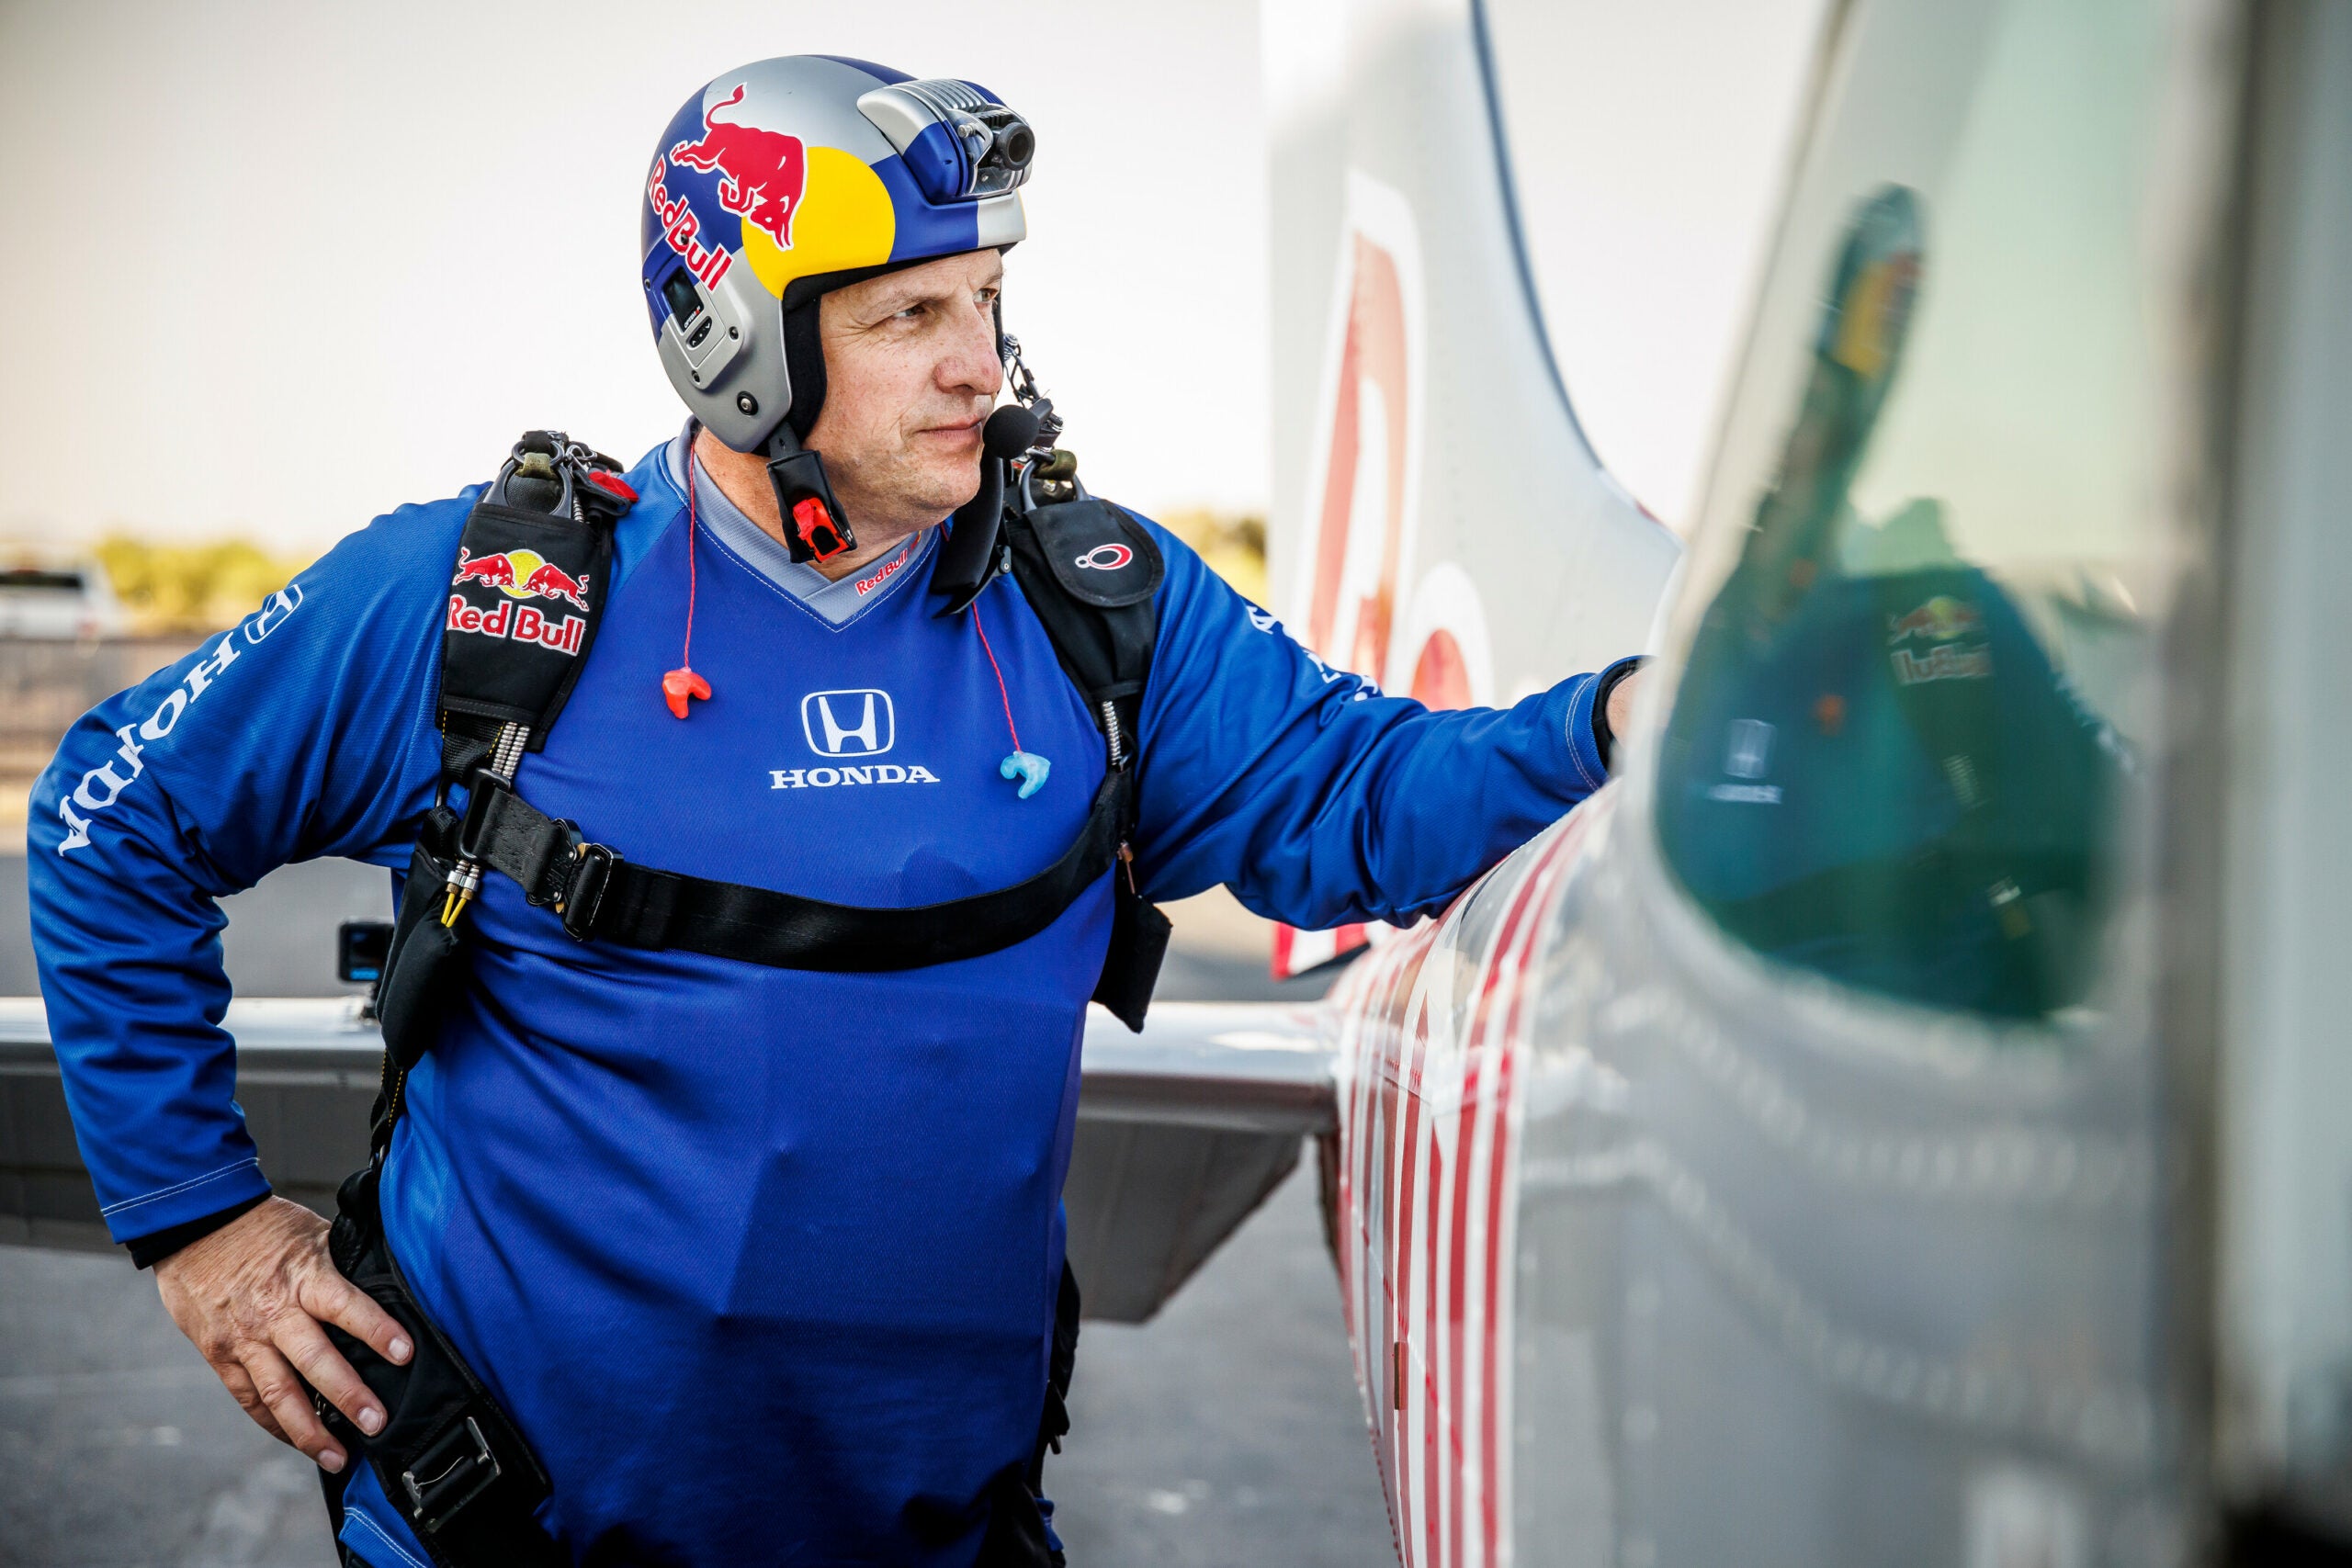 Red Bull Plane Swap Pilot Appears to Post Instagram Confession